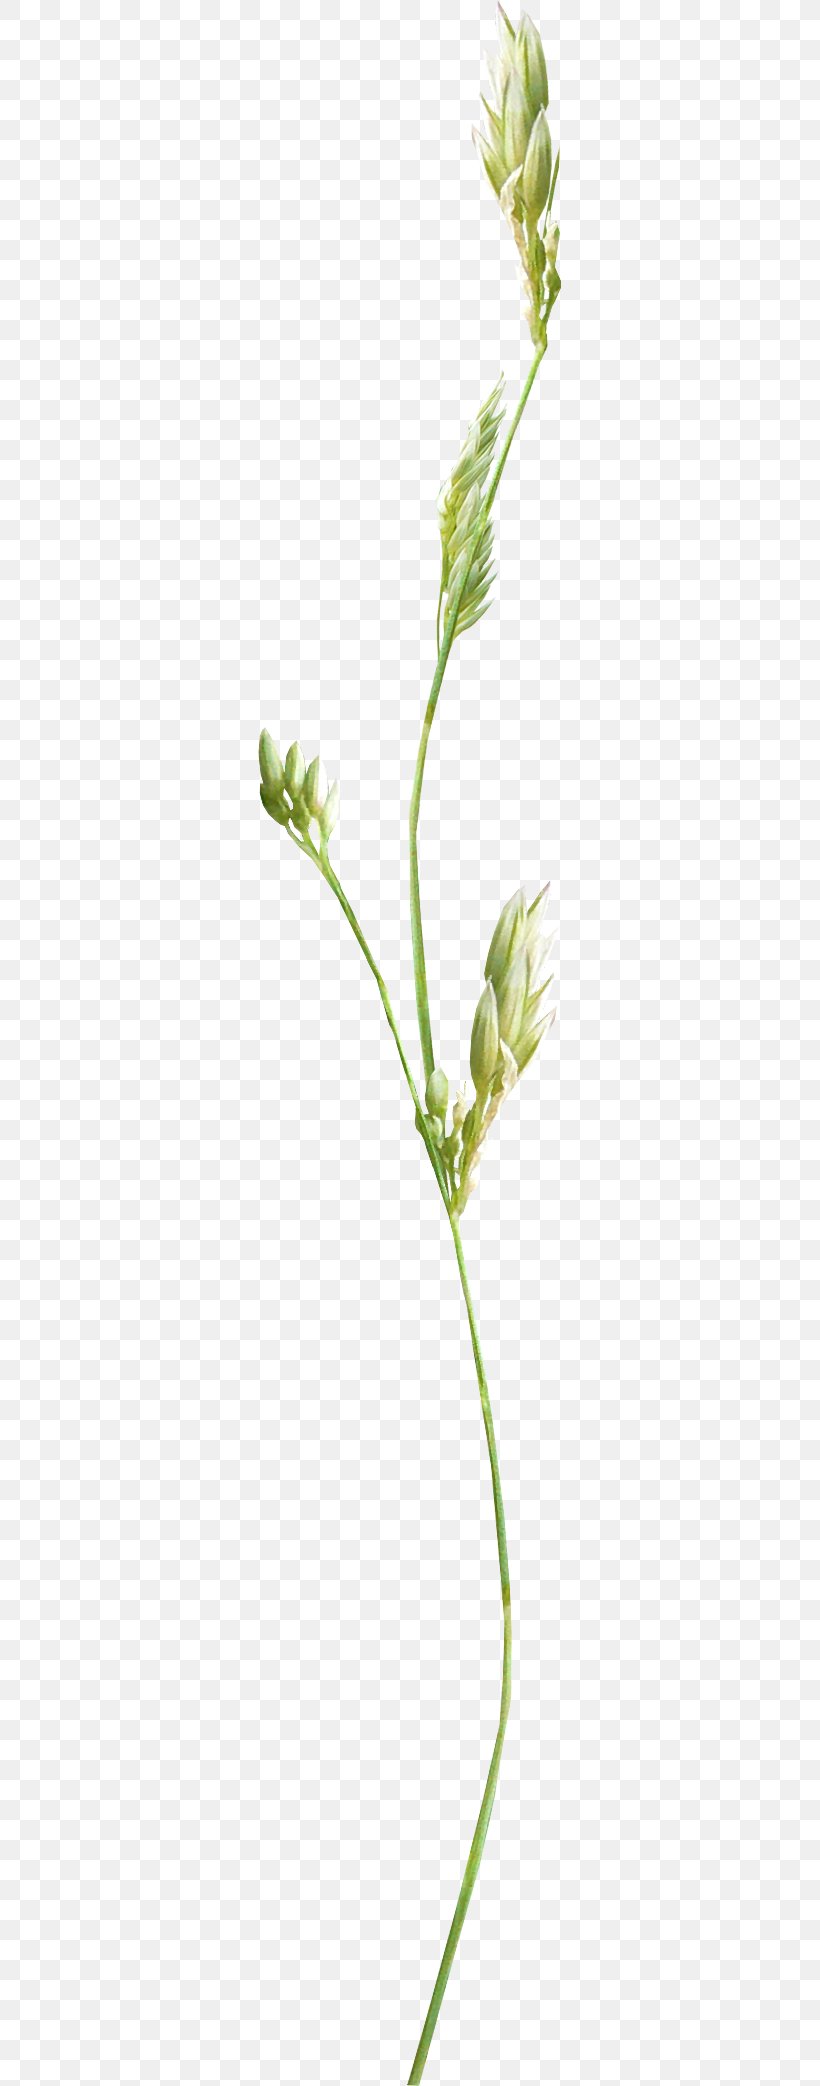 Photography Flower Picture Frames Clip Art, PNG, 303x2086px, Photography, Commodity, Flower, Flowering Plant, Grass Download Free